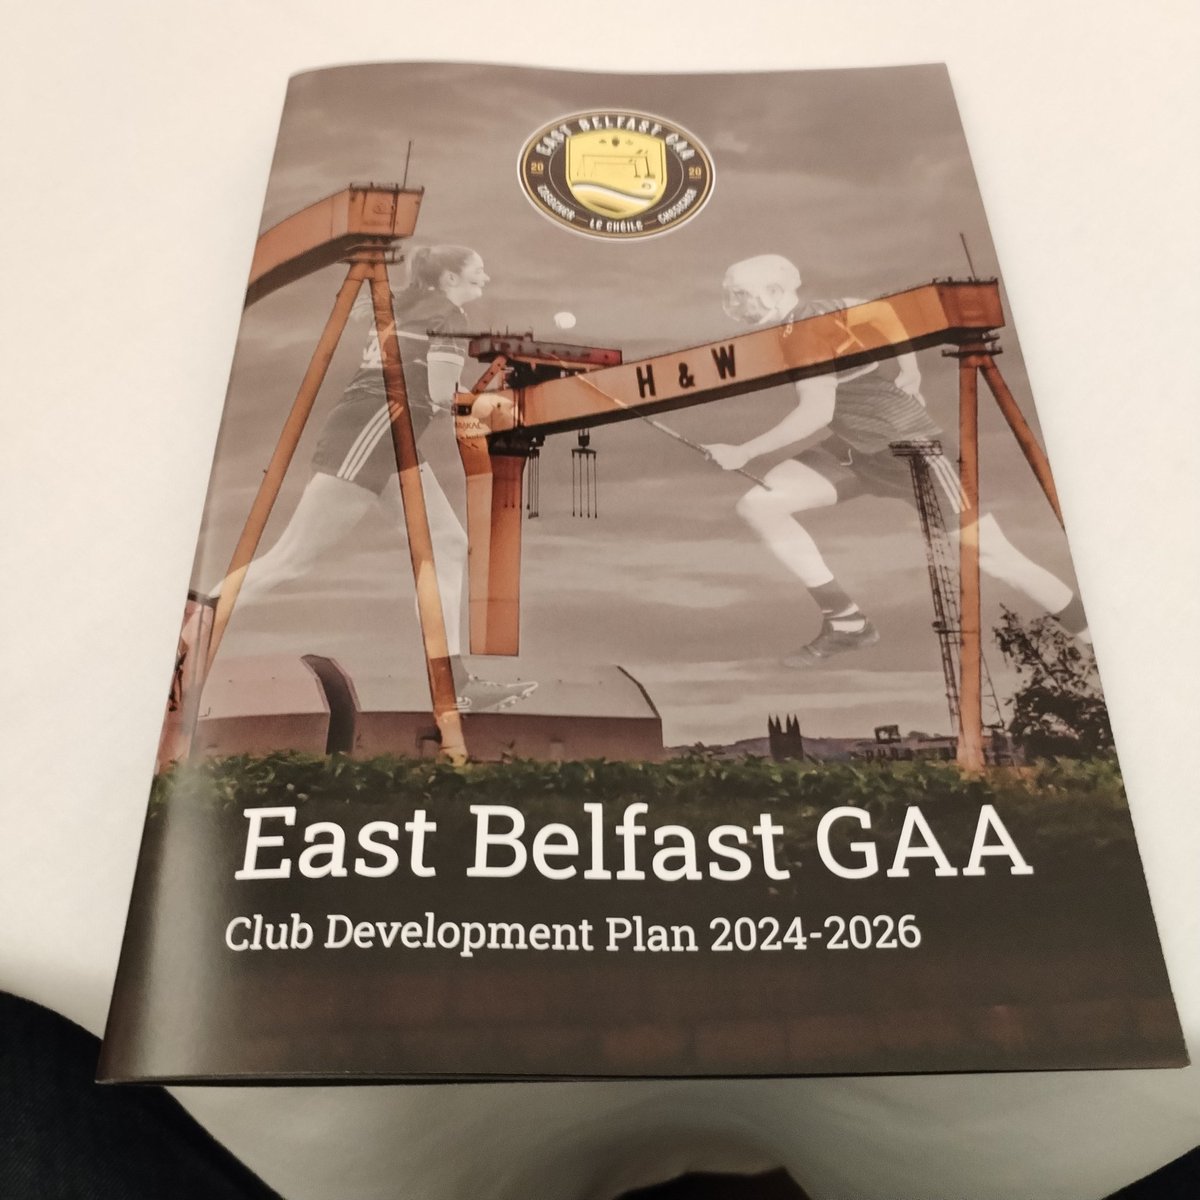 A full house in the Titanic Hotel this evening for the launch of @EastBelfastGAA development plan. The club have made great strides in just 4 years and add to the sporting and community fabric in the East of the City. #Together #LeChéile #Thegither